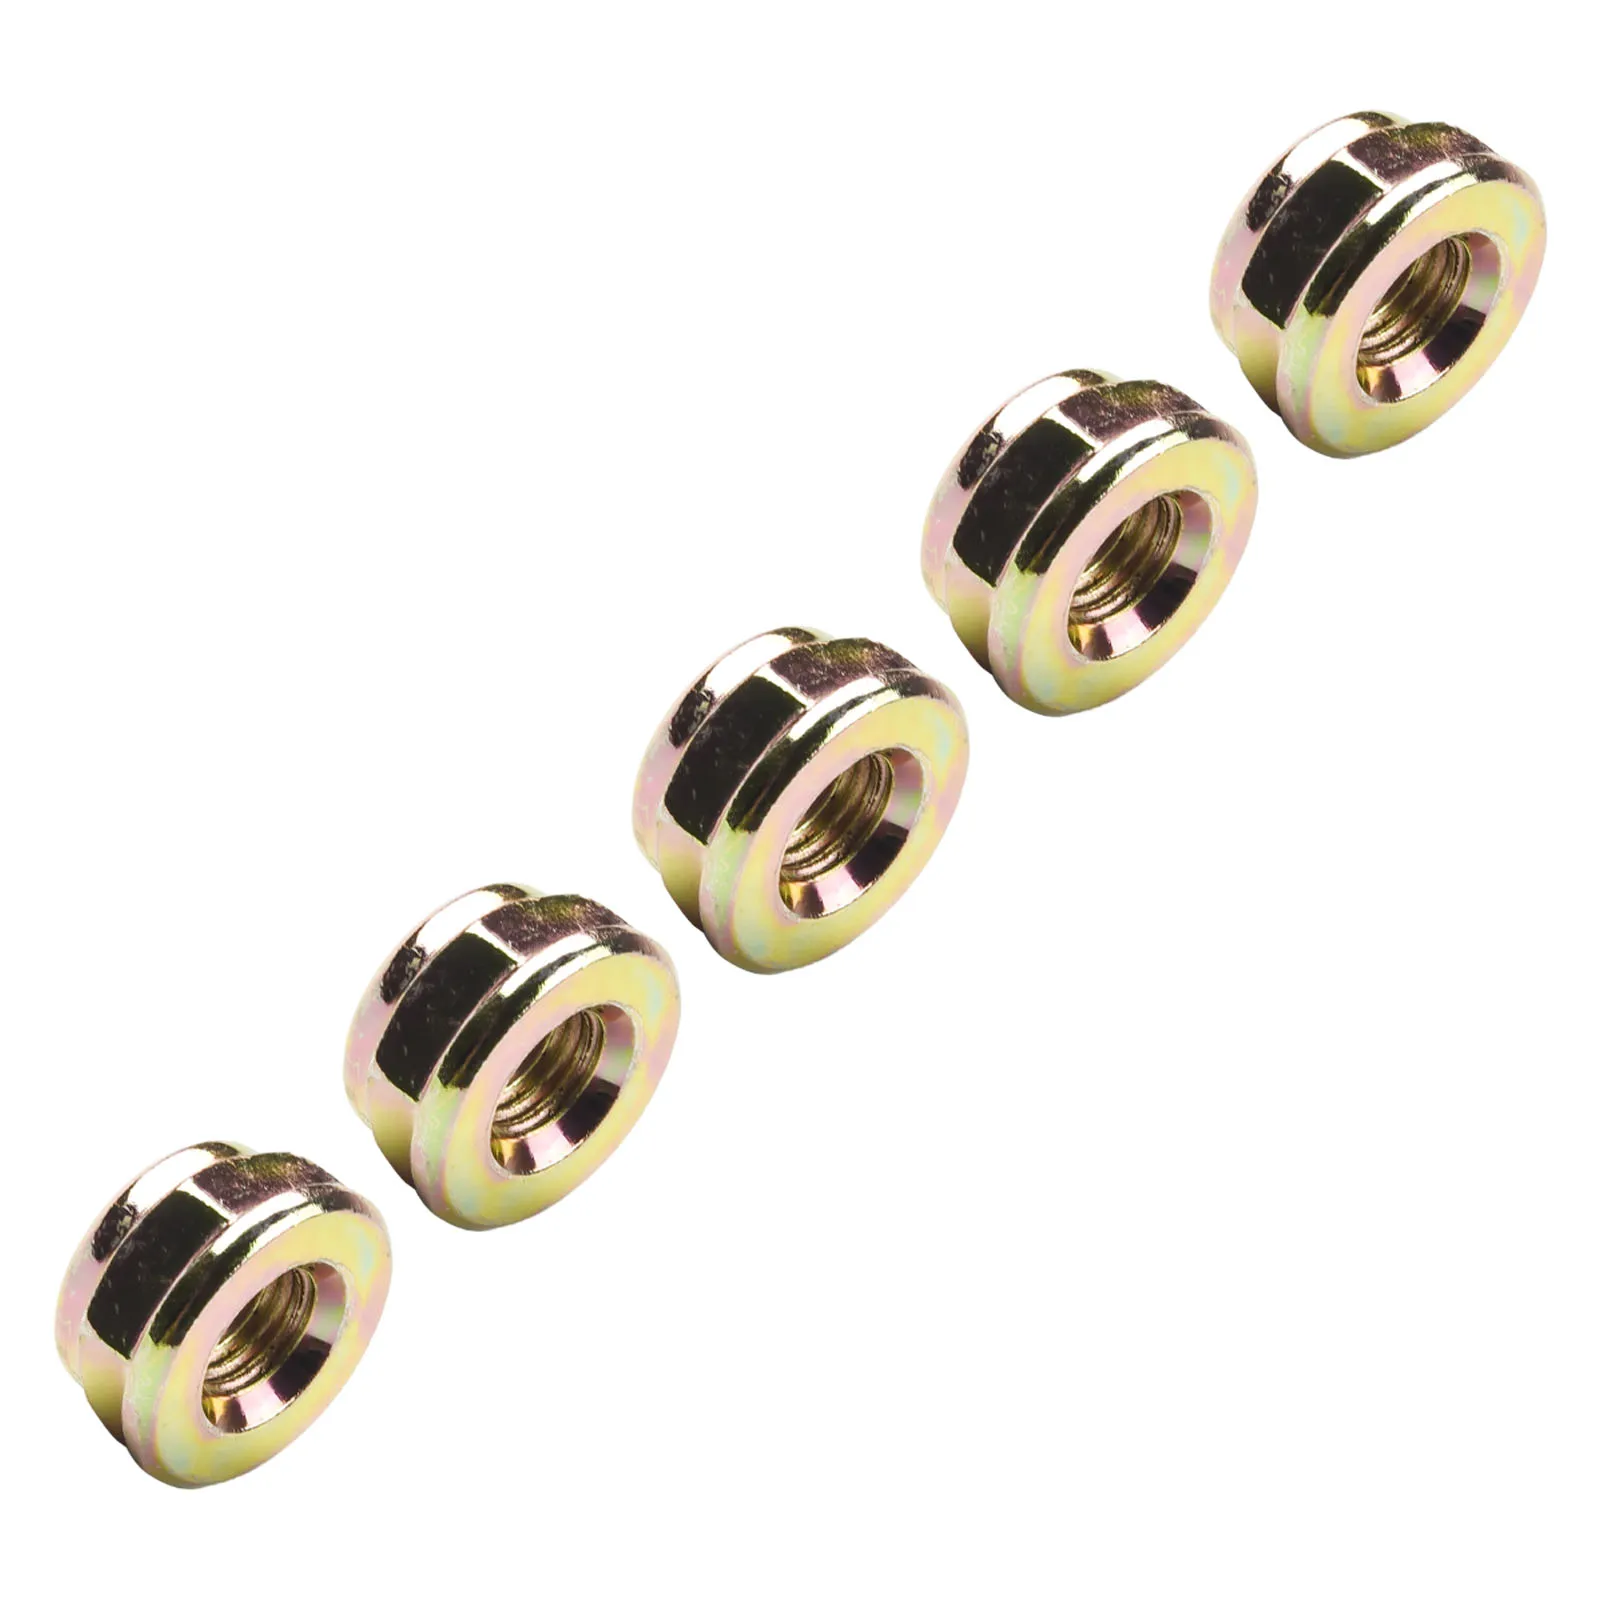 

Tools Spare Replacement Nuts Accessories Screw Parts 5pcs 5pcs Set String String trimmer Trimmer Brush Cutter Brush